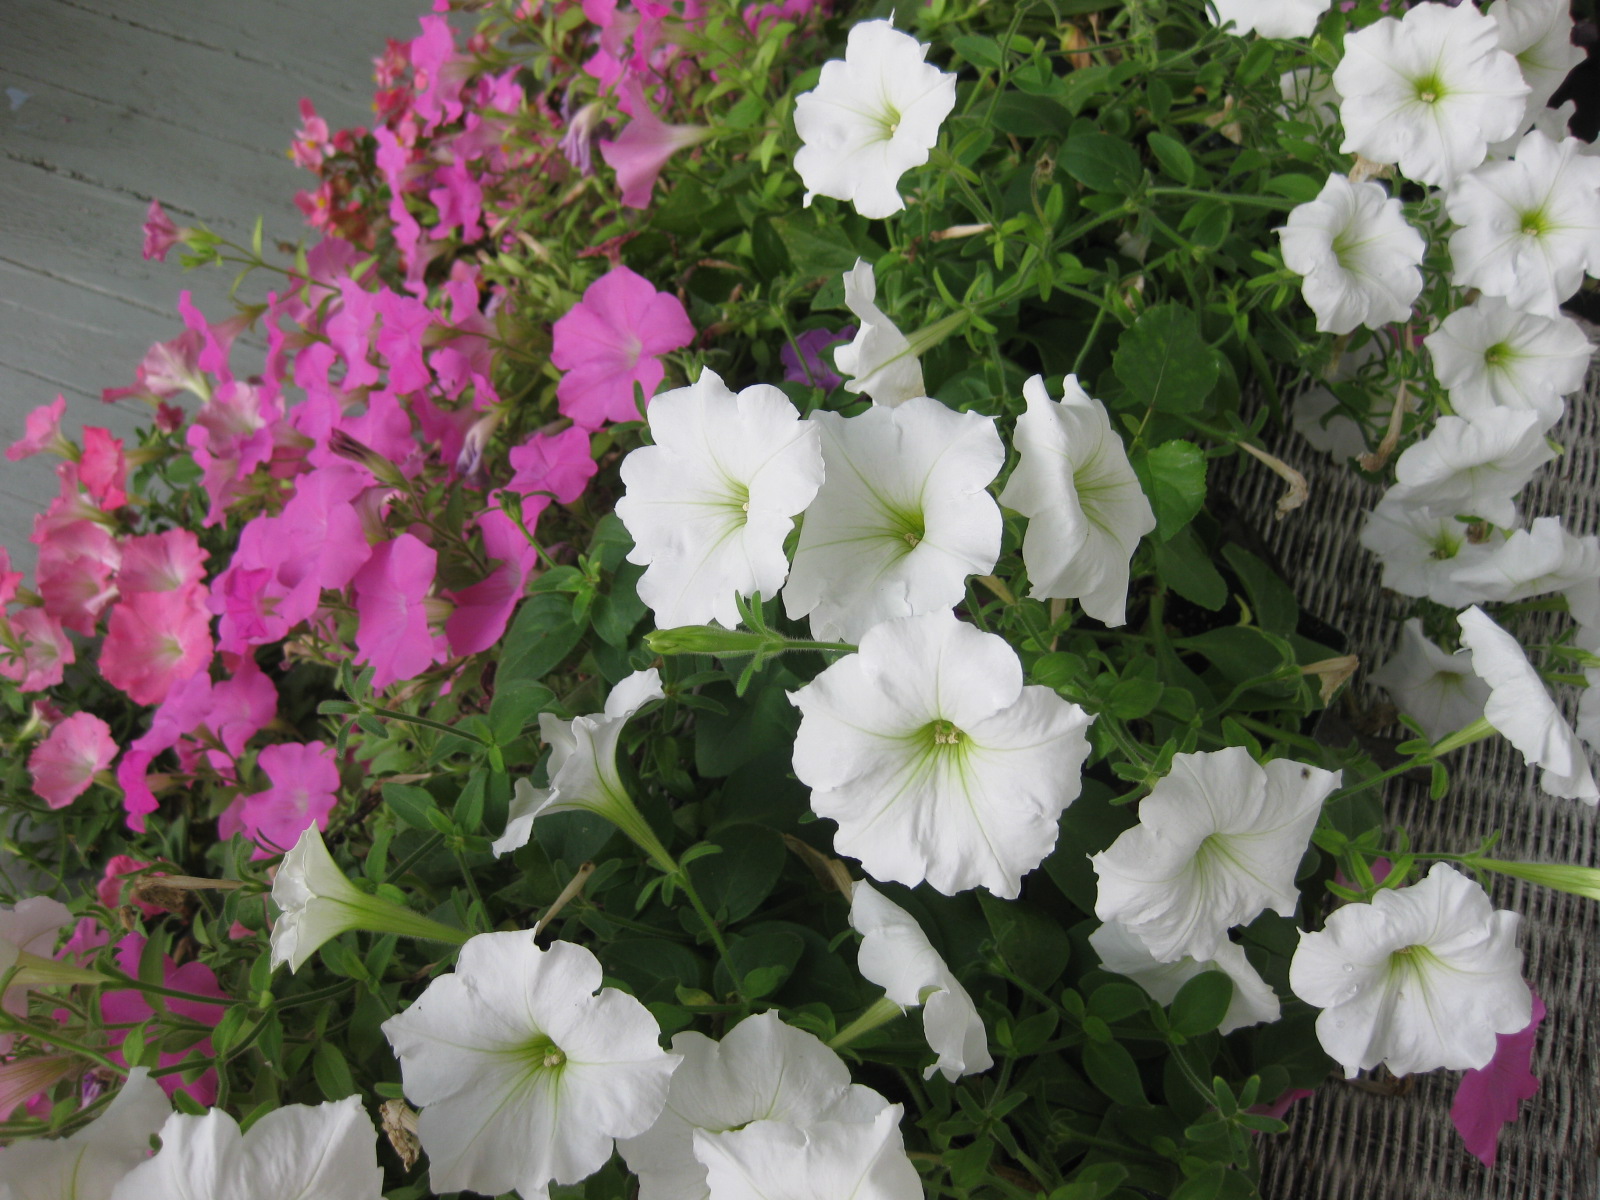 Tip: First Aid for Weary Petunias